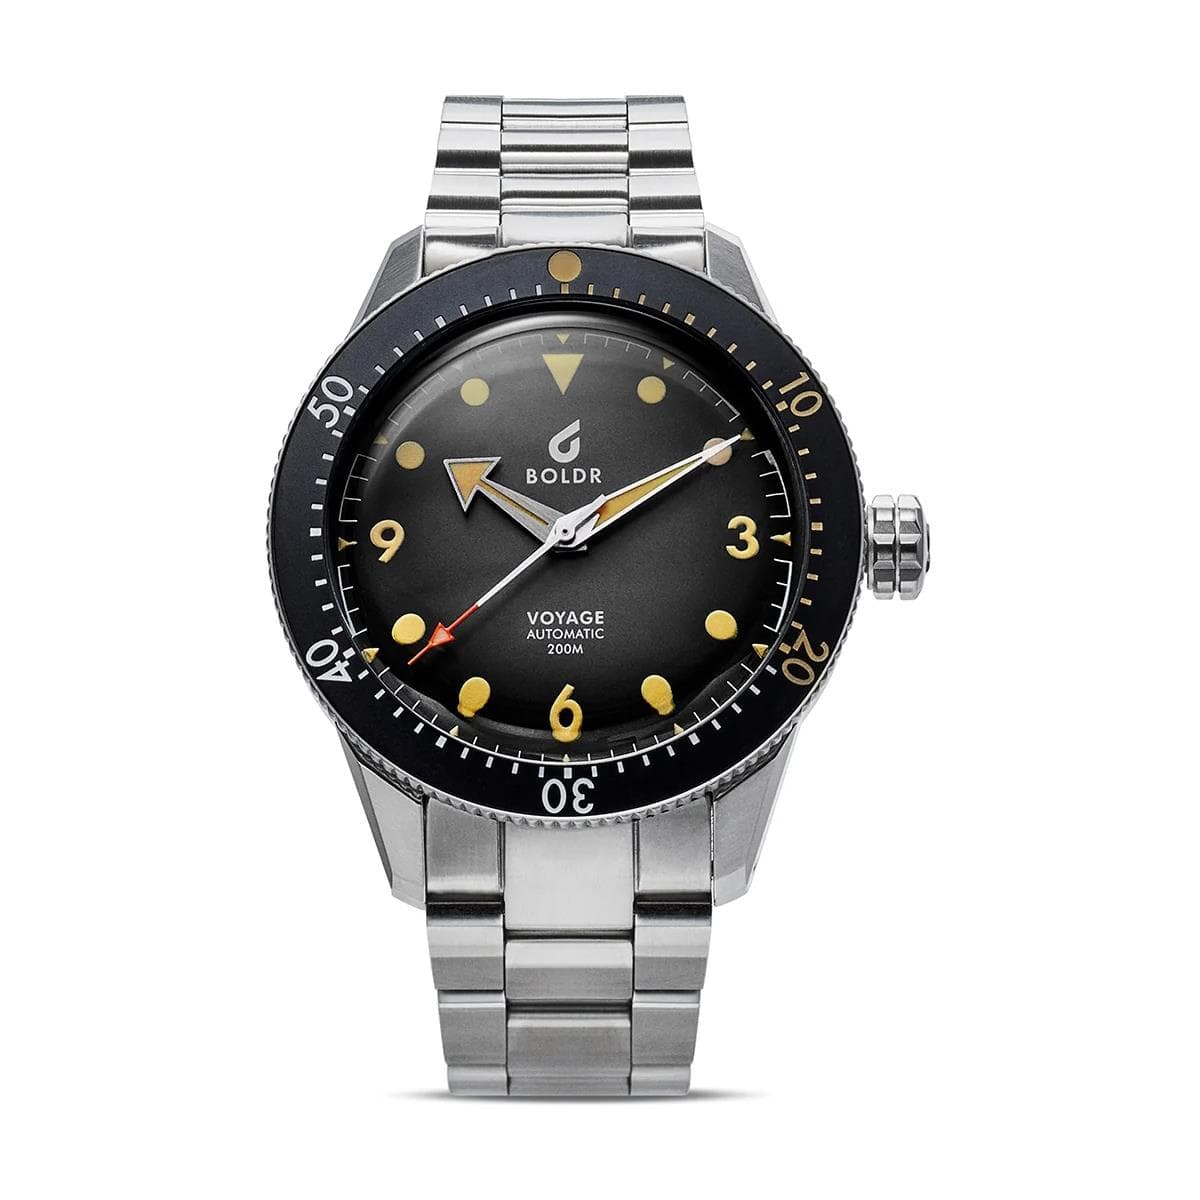 Boldr Voyage Mediterranean Automatic Dive Watch - NEARLY NEW